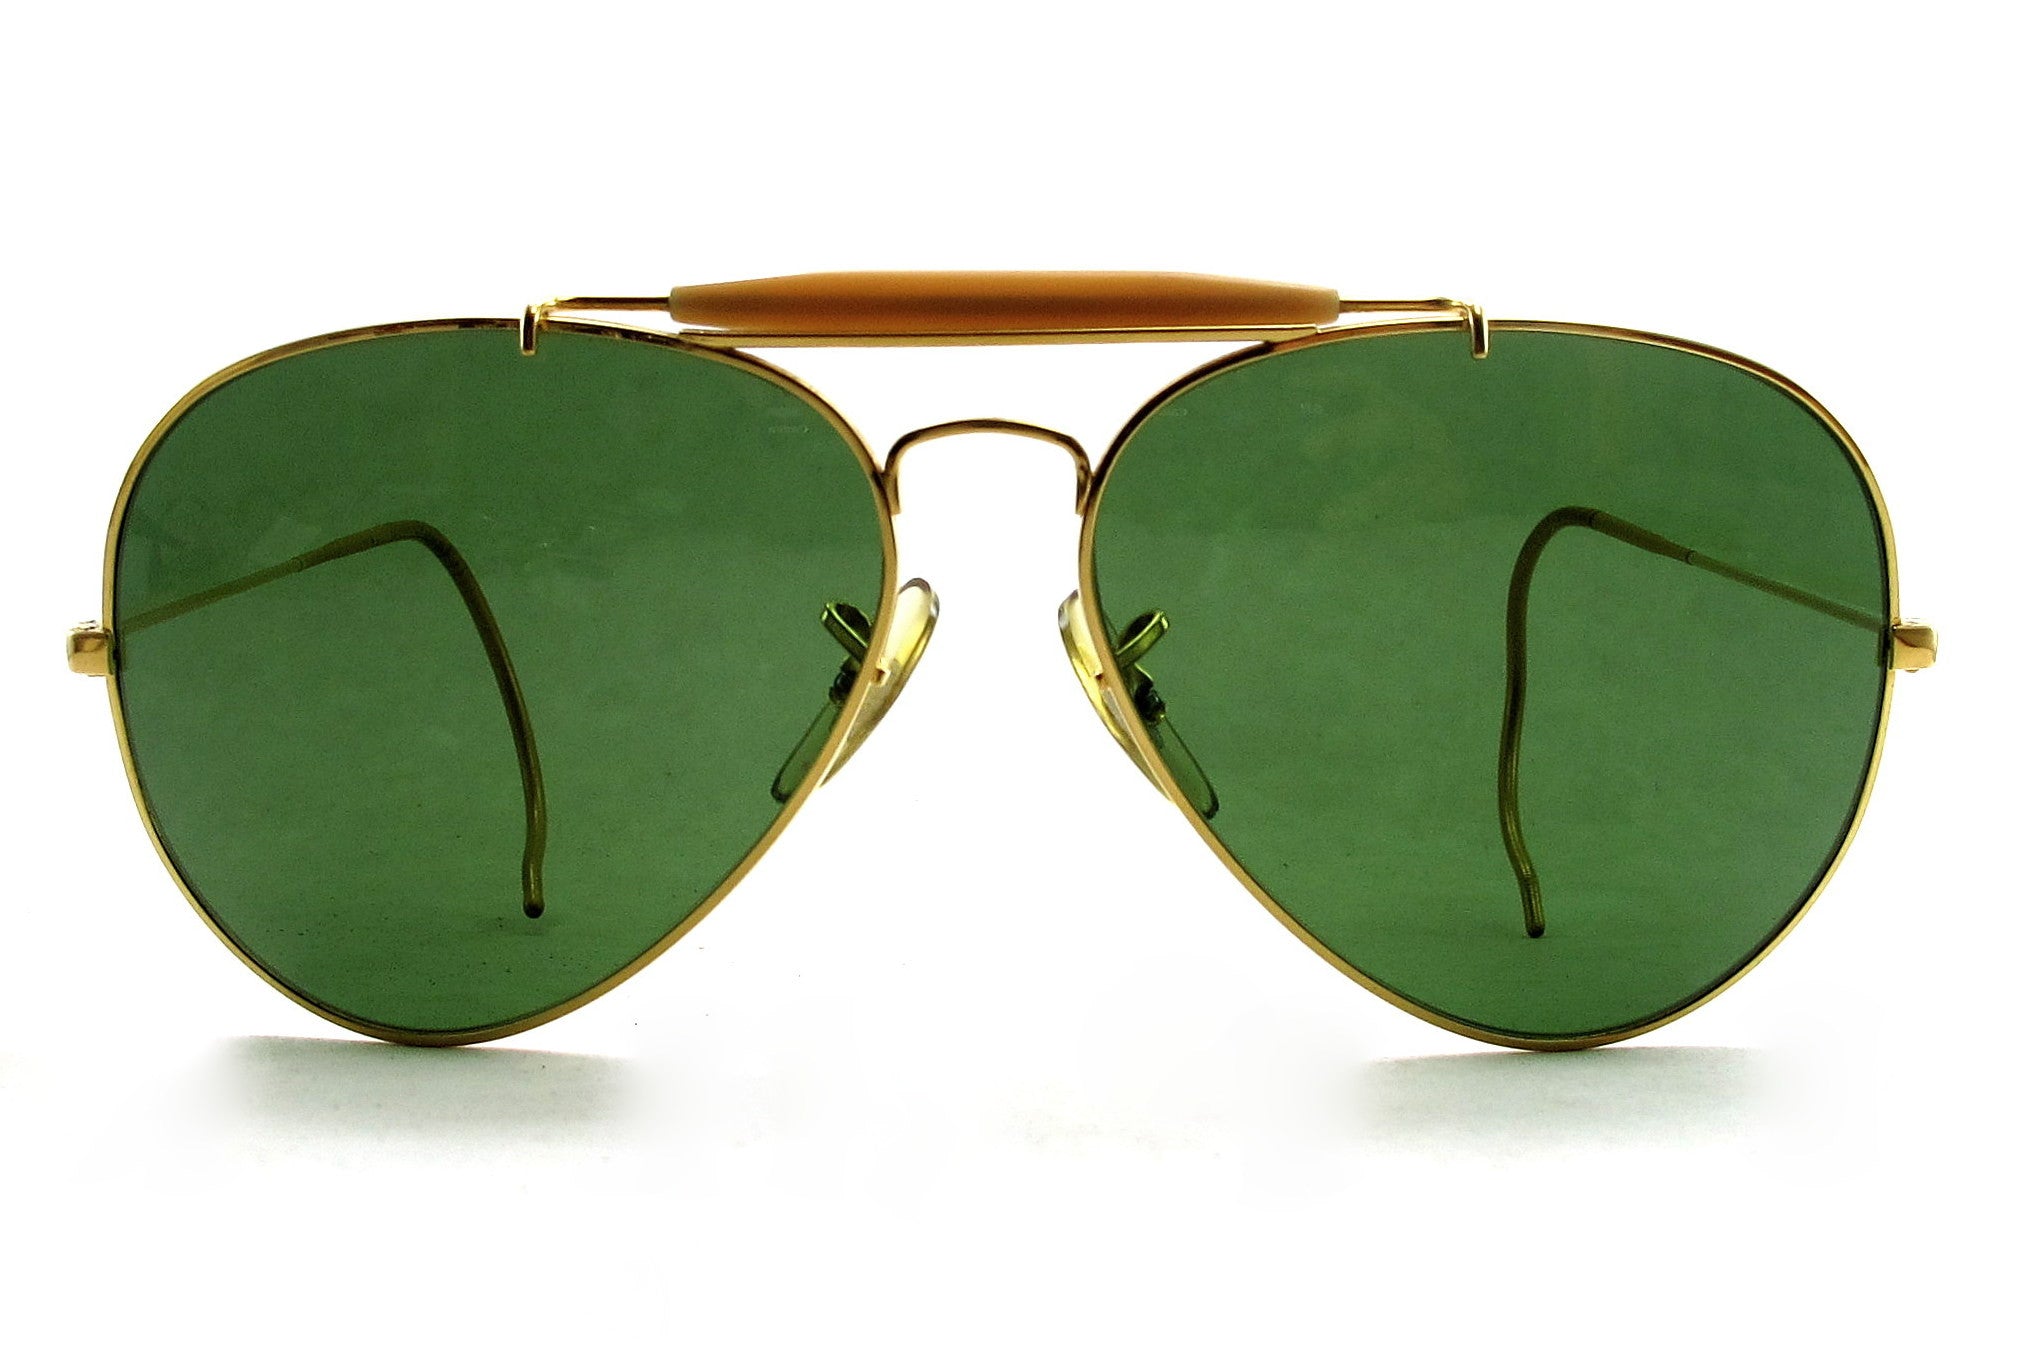 Arriba 90+ imagen bausch and lomb ray ban